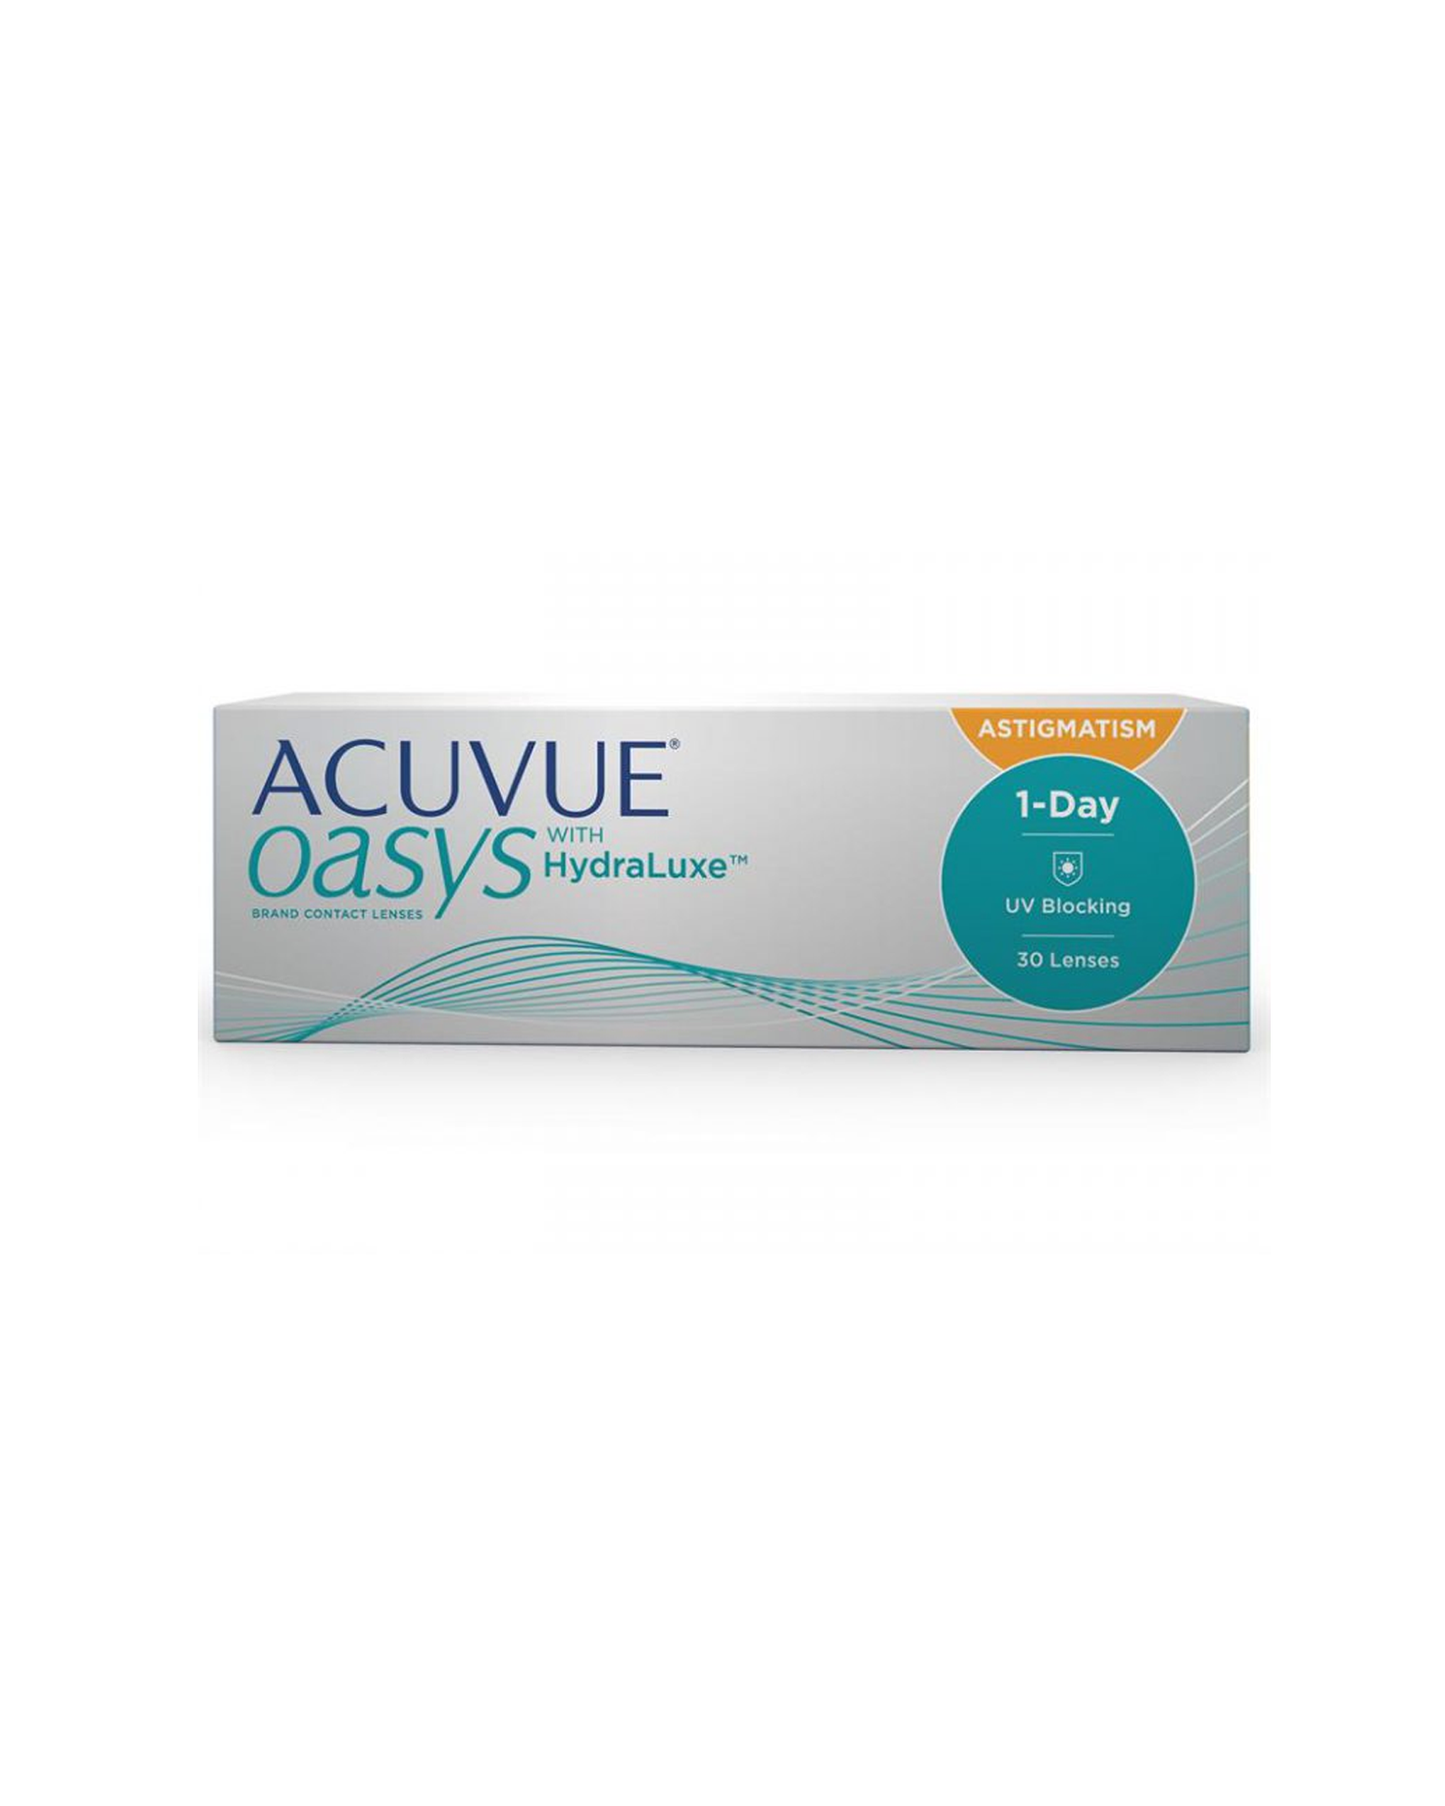 ACUVUE® OASYS 1-DAY for ASTIGMATISM - Eleven Eleven Contact Lens and Vision Care Experts